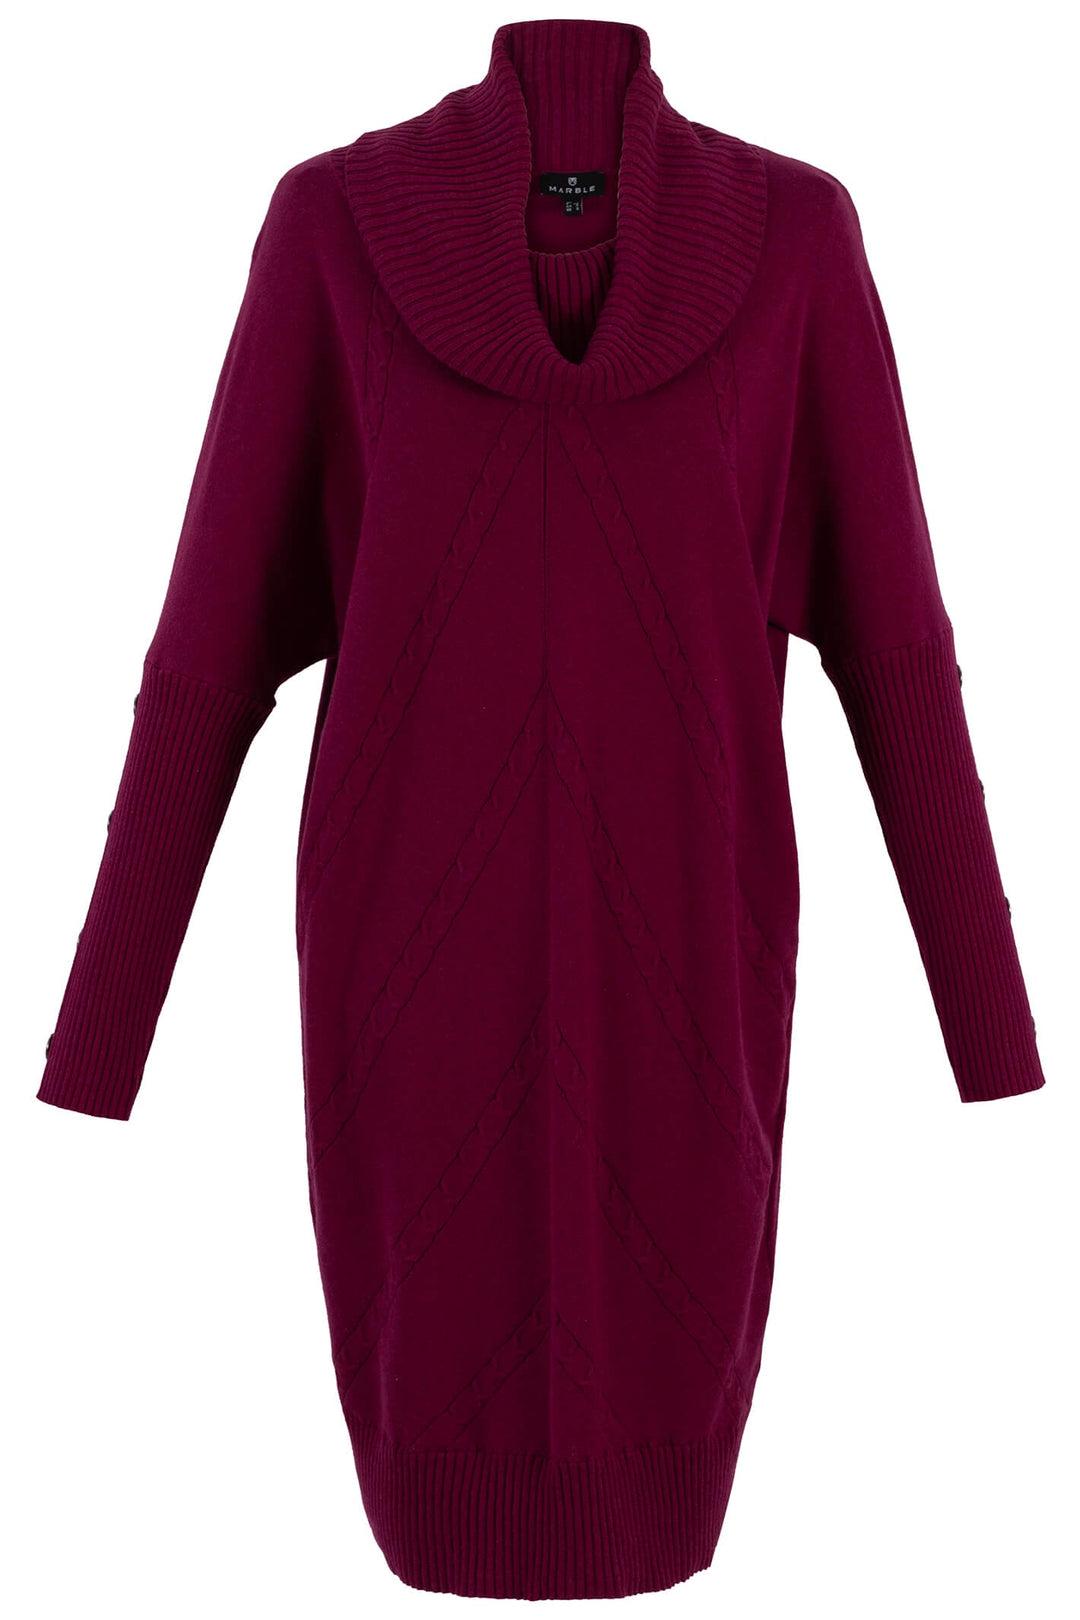 Marble 7184 205 Berry Red Cowl Neck Knit Dress - Dotique